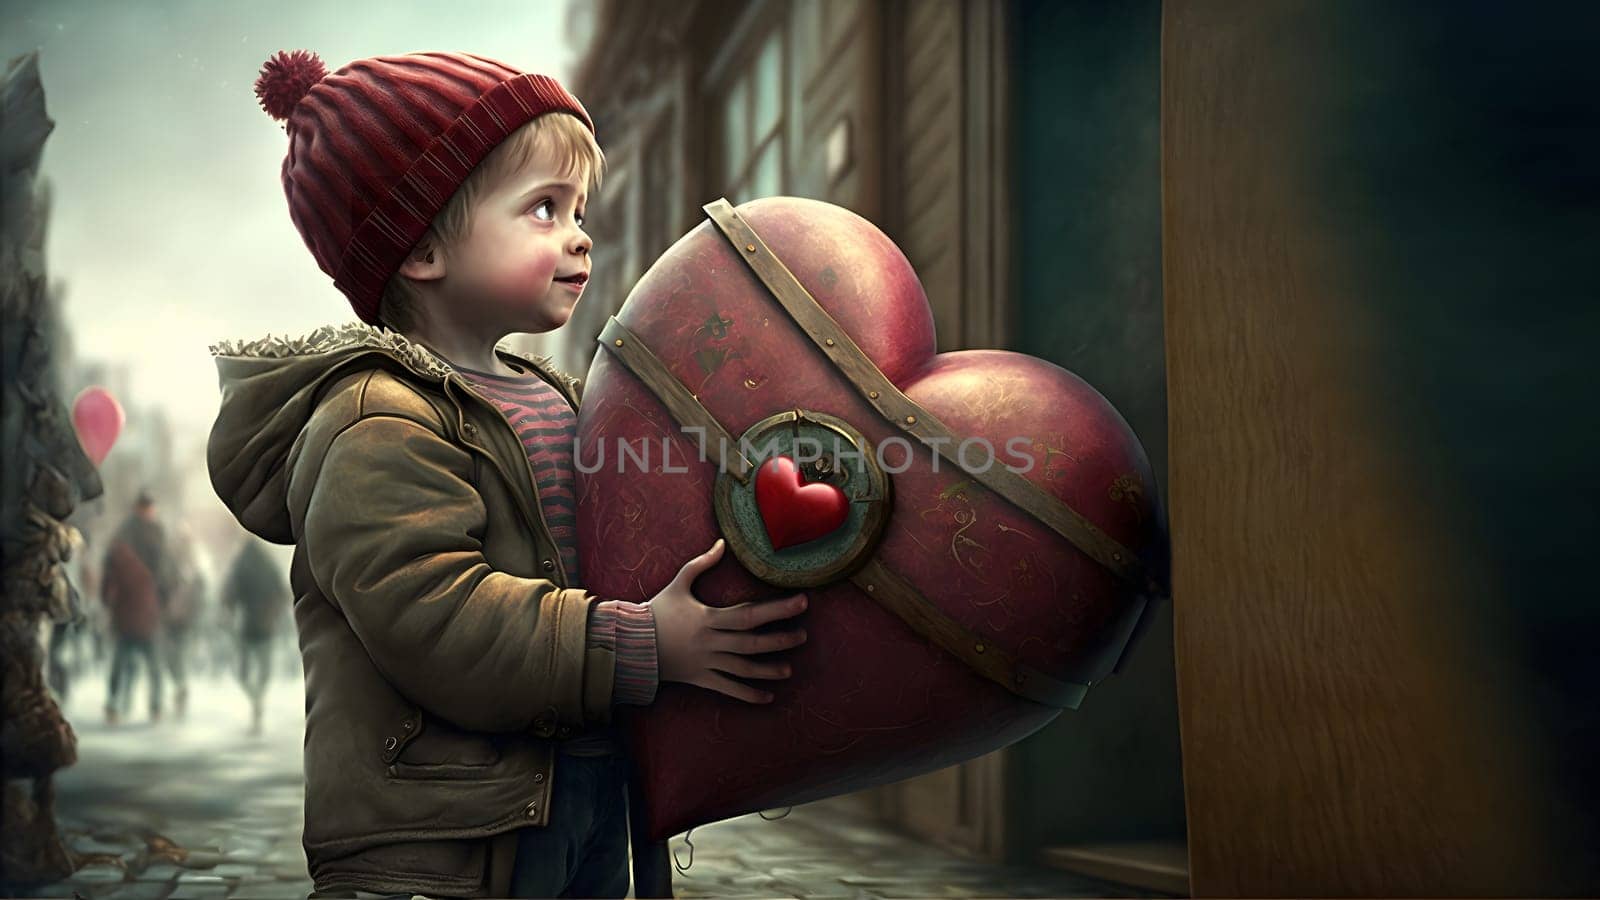 little caucasian boy holding big heart-shaped object on city street, neural network generated art. Digitally generated image. Not based on any actual person, scene or pattern.